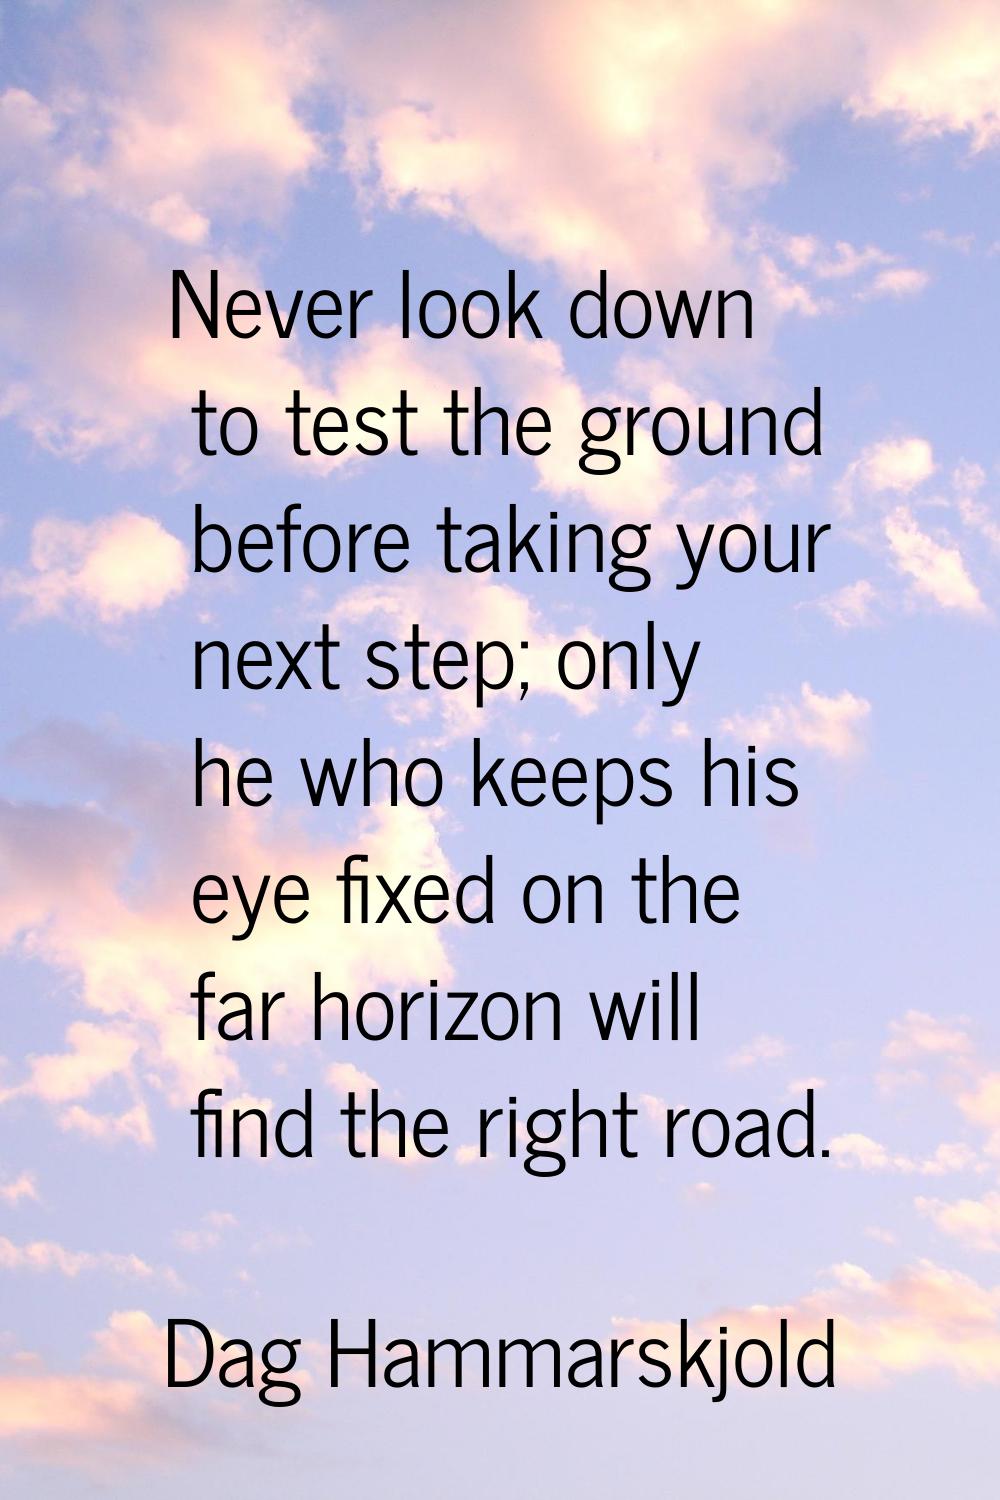 Never look down to test the ground before taking your next step; only he who keeps his eye fixed on